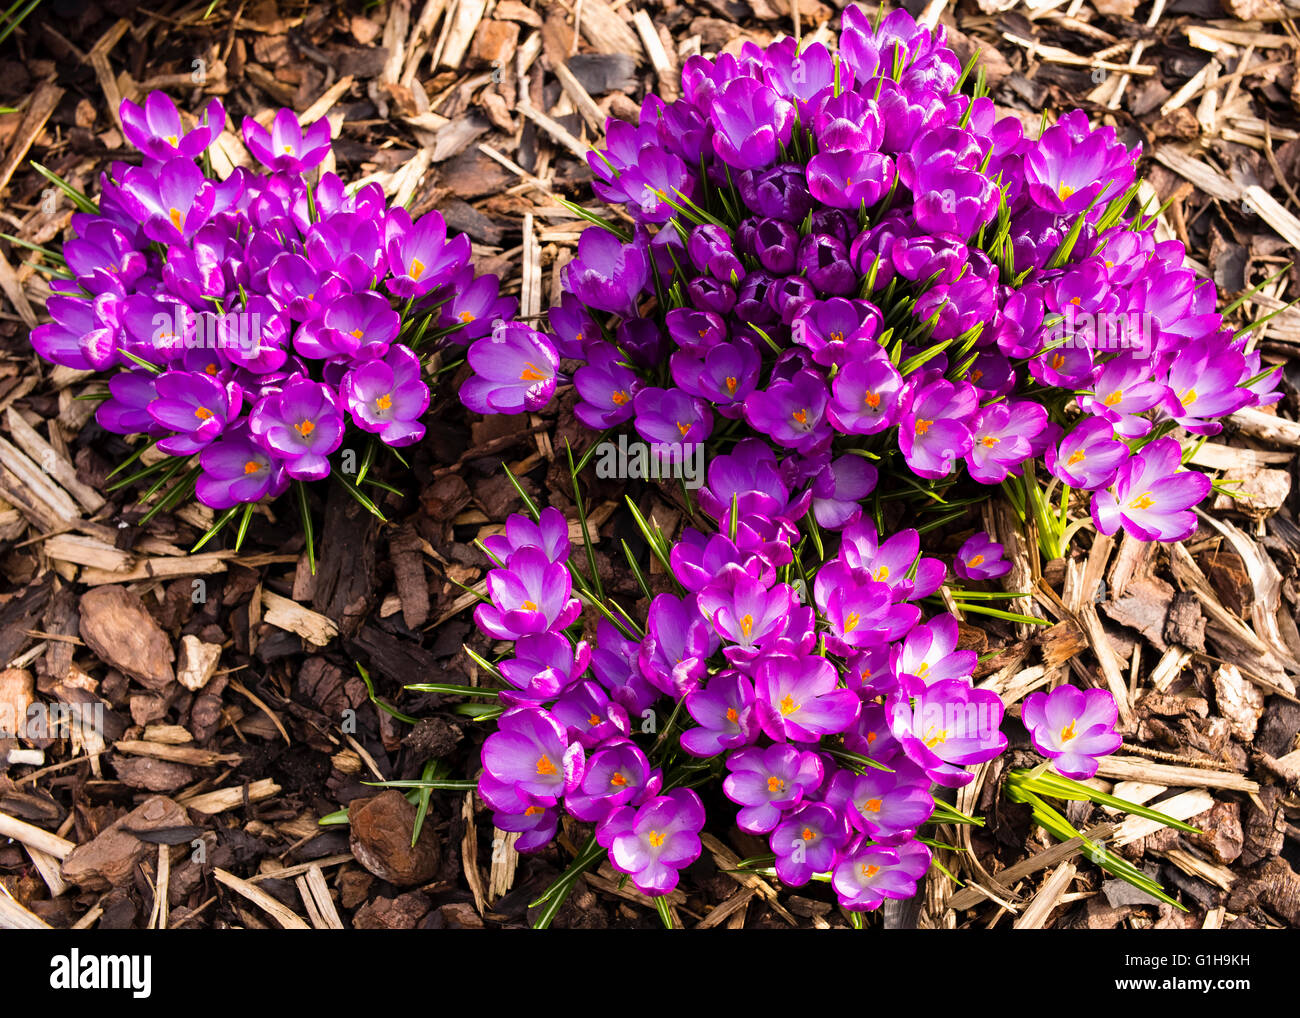 Bright Spring flowers amidst bark wood chippings, York, Yorkshire, England, UK Stock Photo